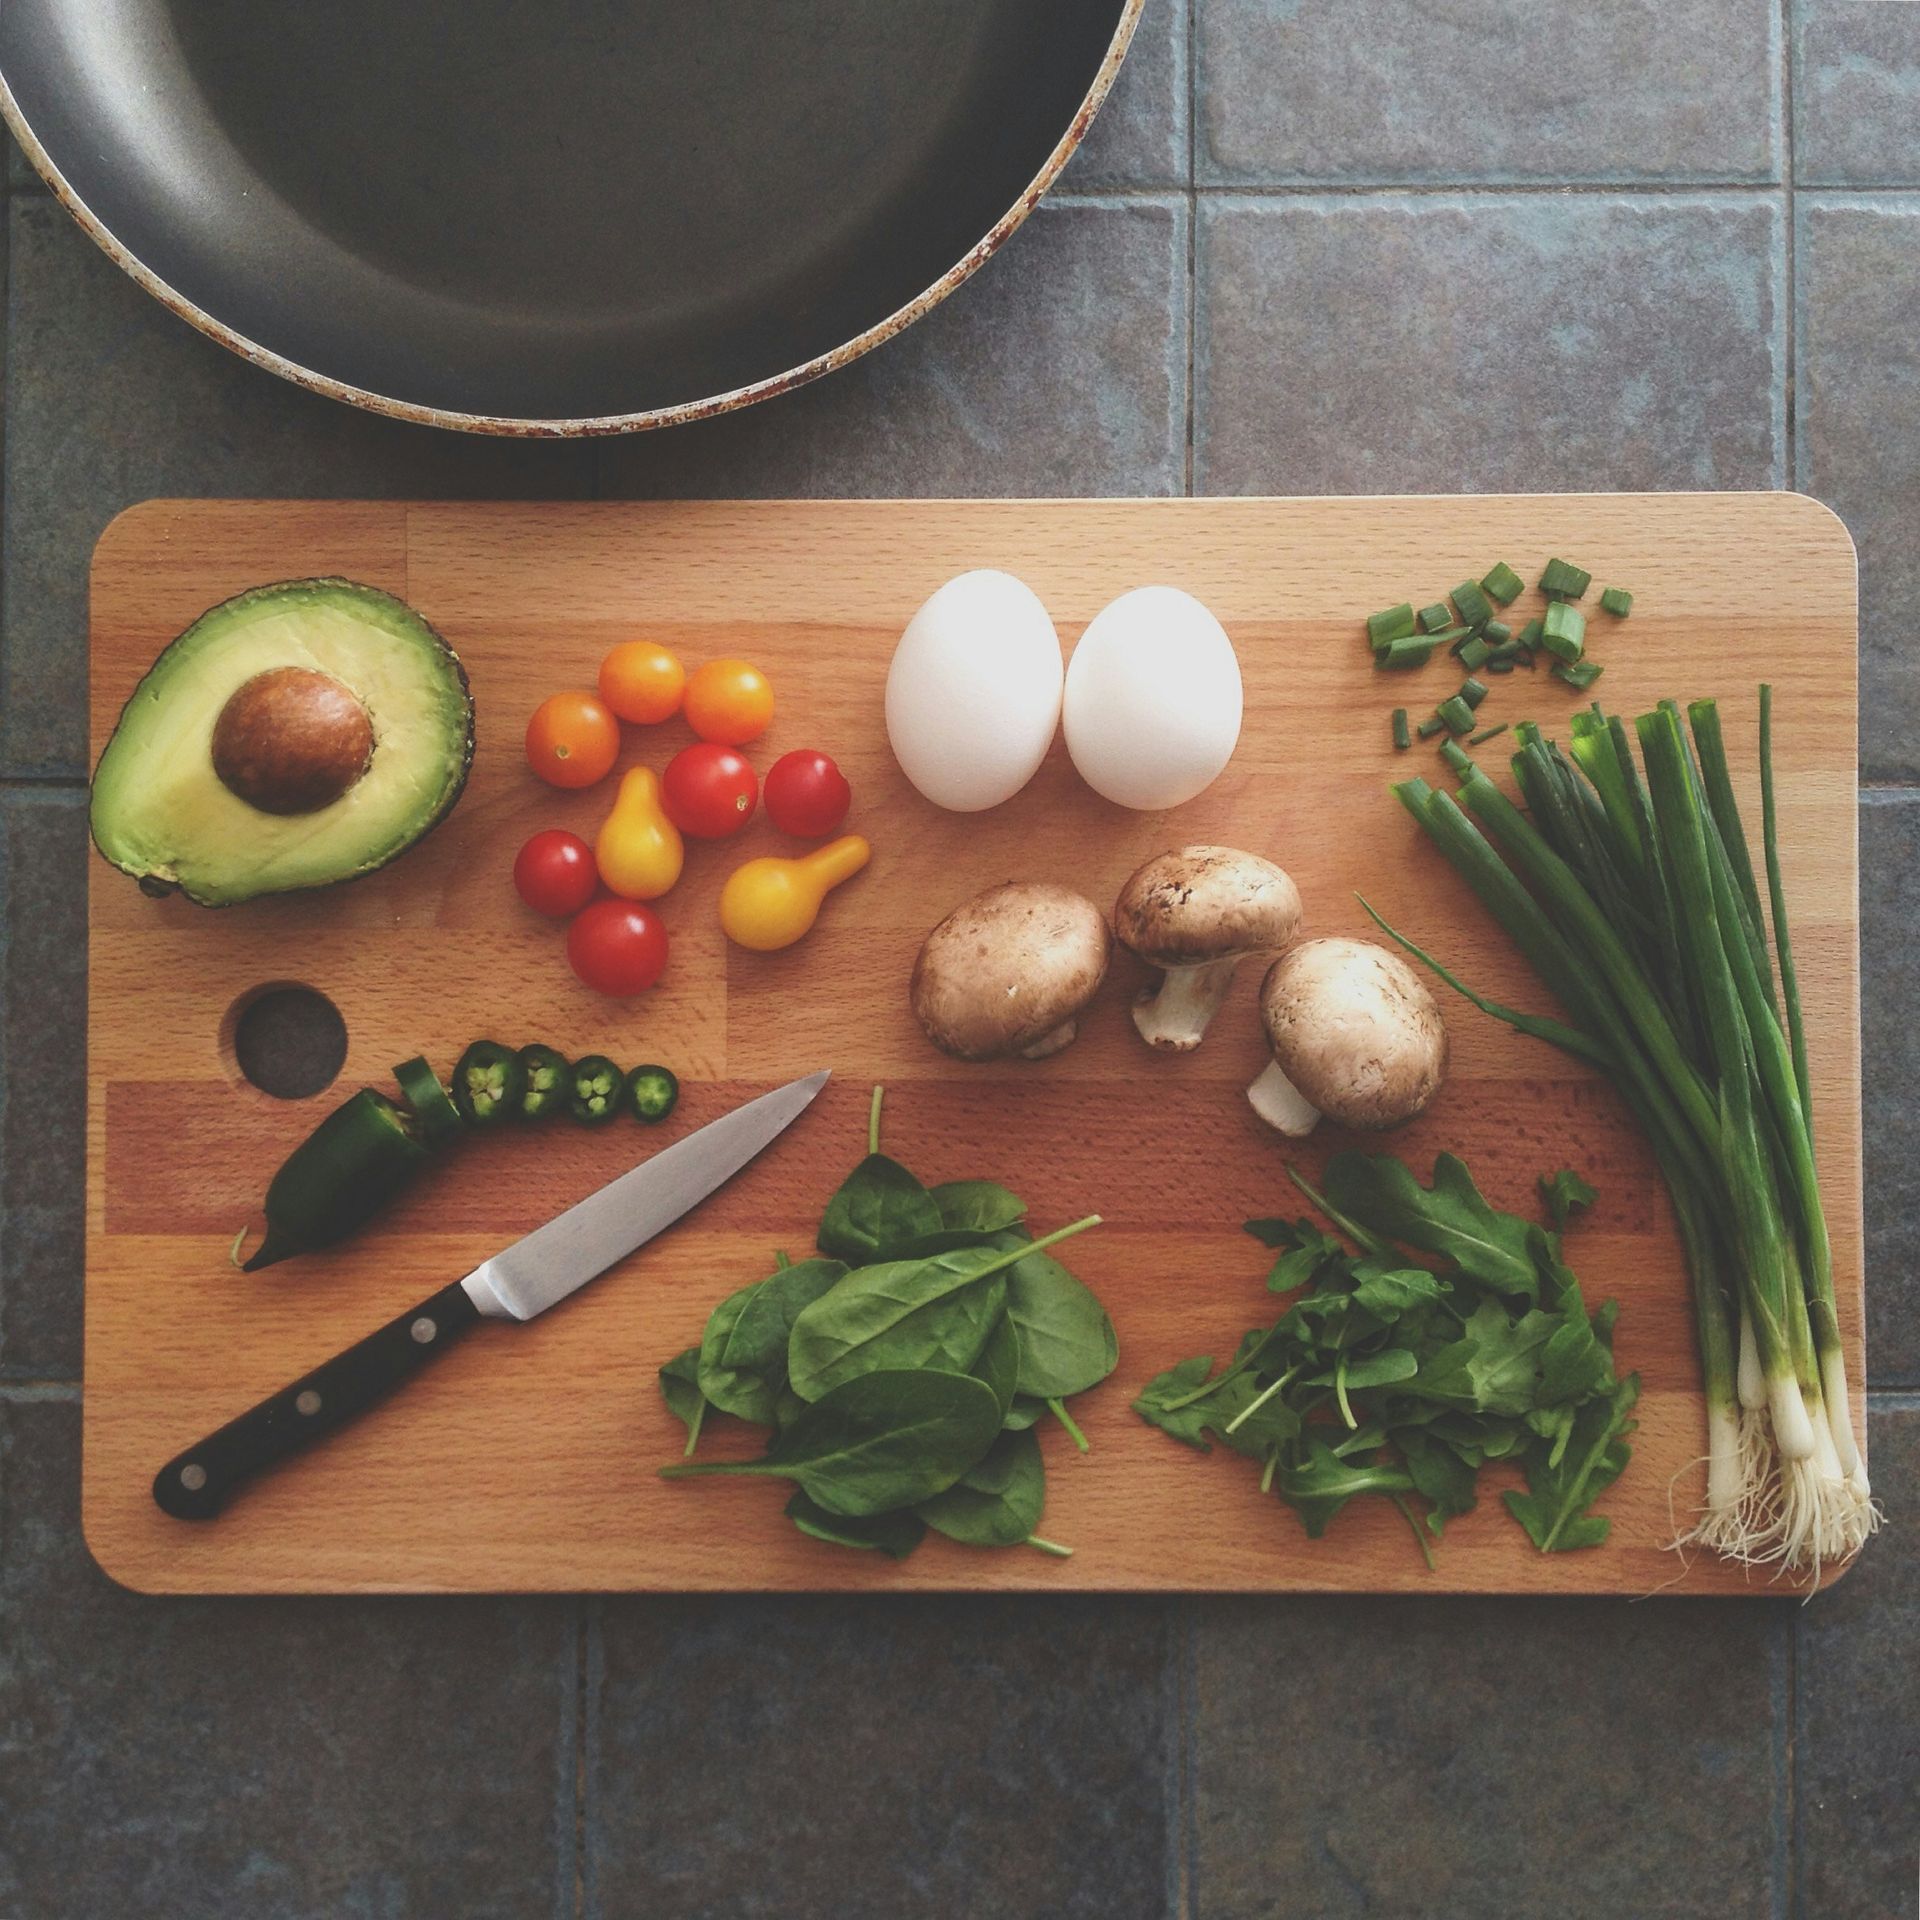 a wooden cutting board with vegetables and eggs on it.